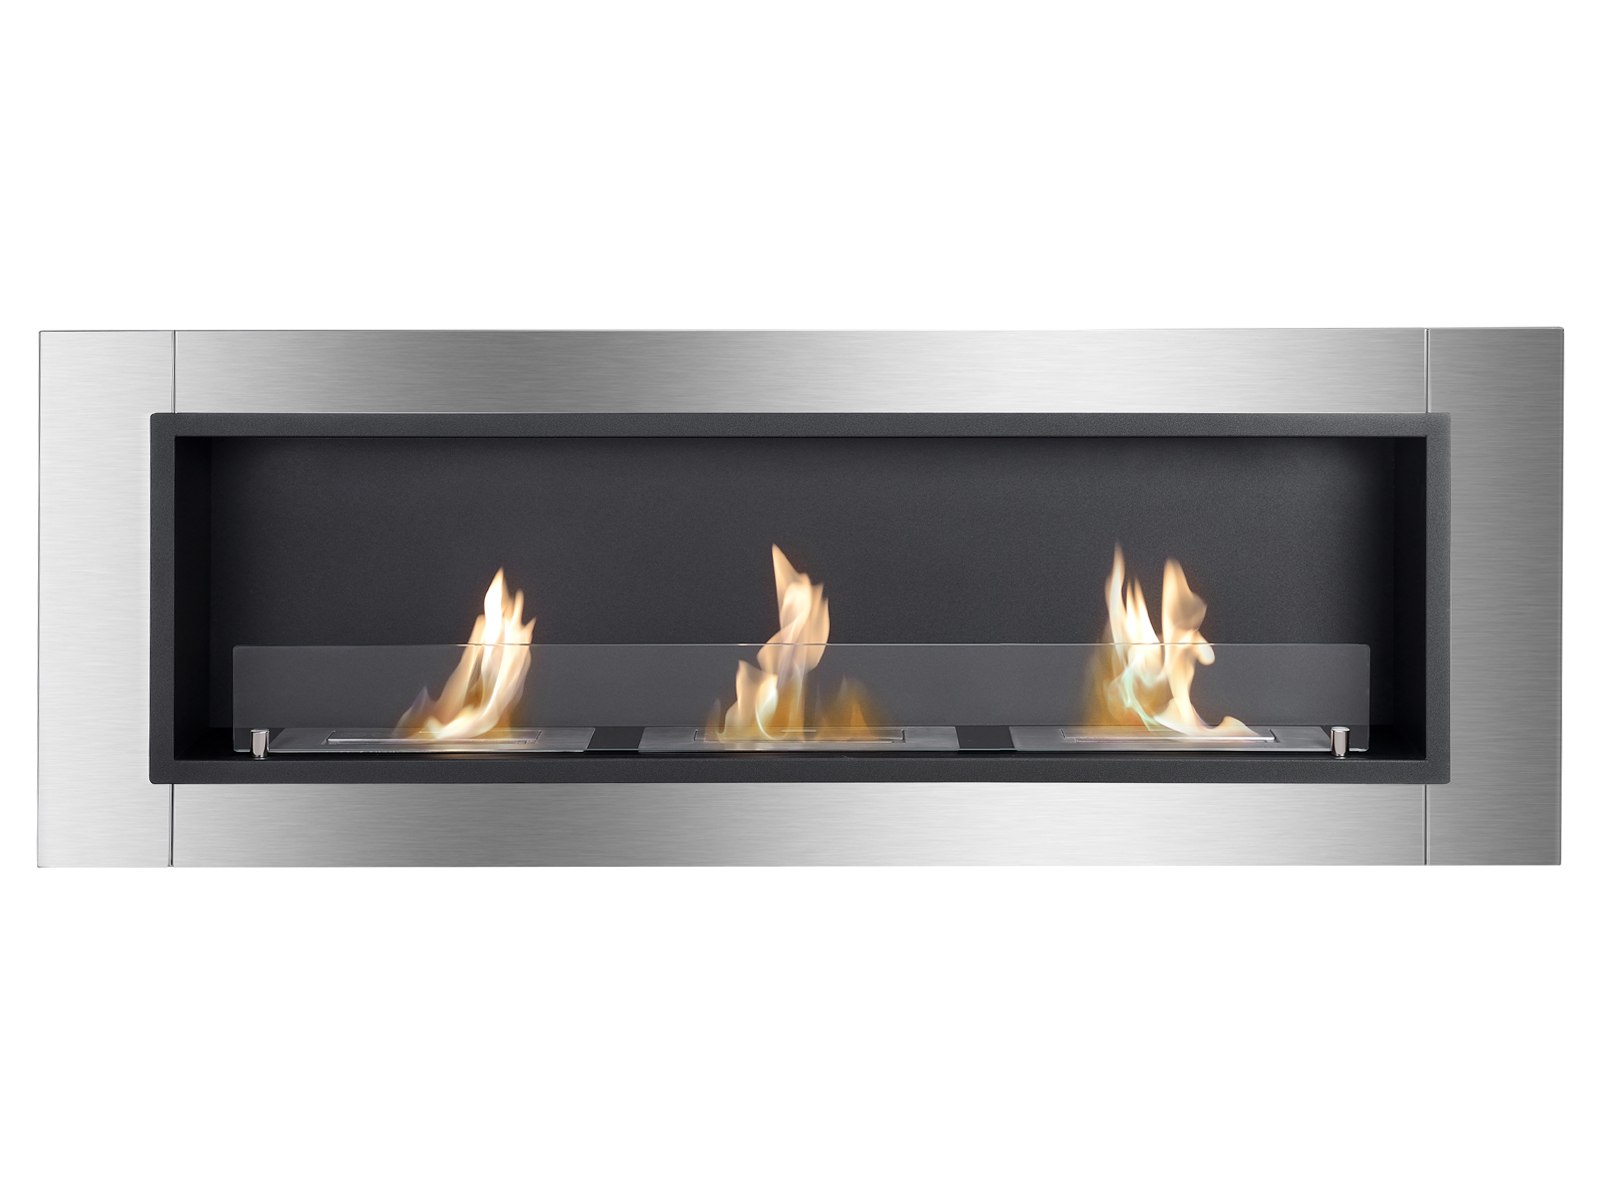 Ardella Ventless Recessed Ethanol Fireplace with Flame Front View